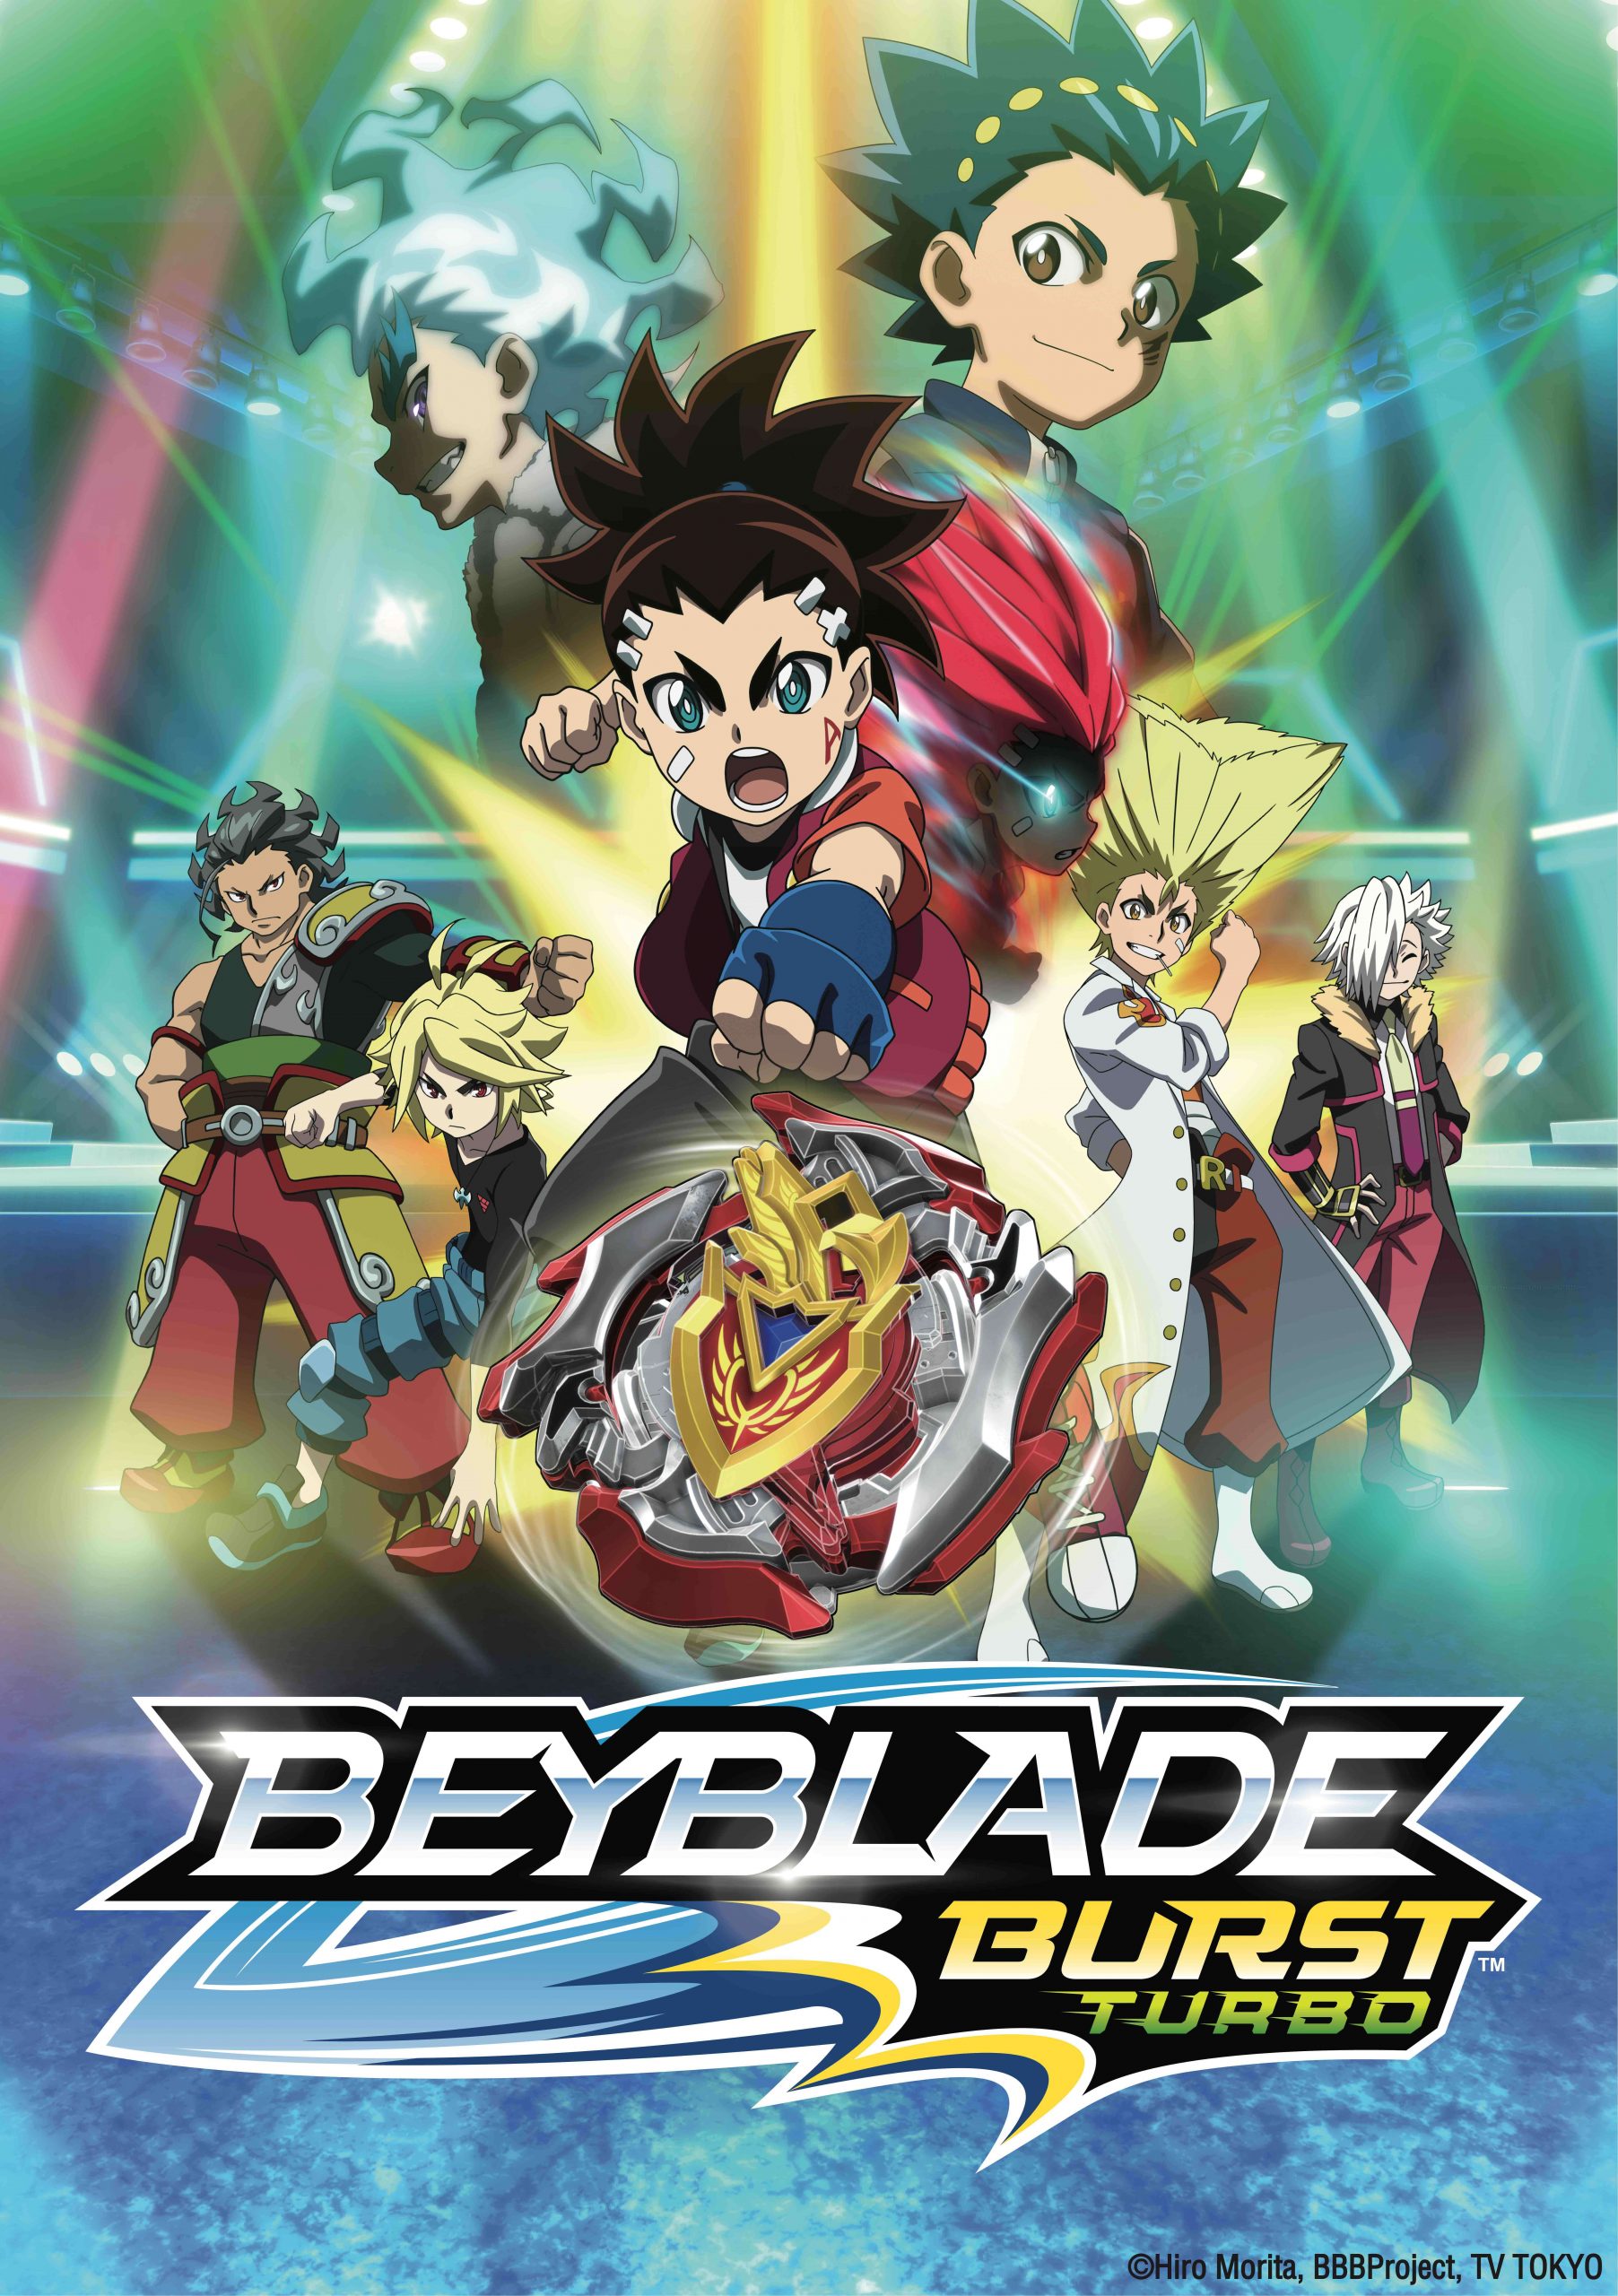 The third season of Beyblade's 3rd Generation, 'Beyblade Burst Turbo', debuts on Marvel HQ in India